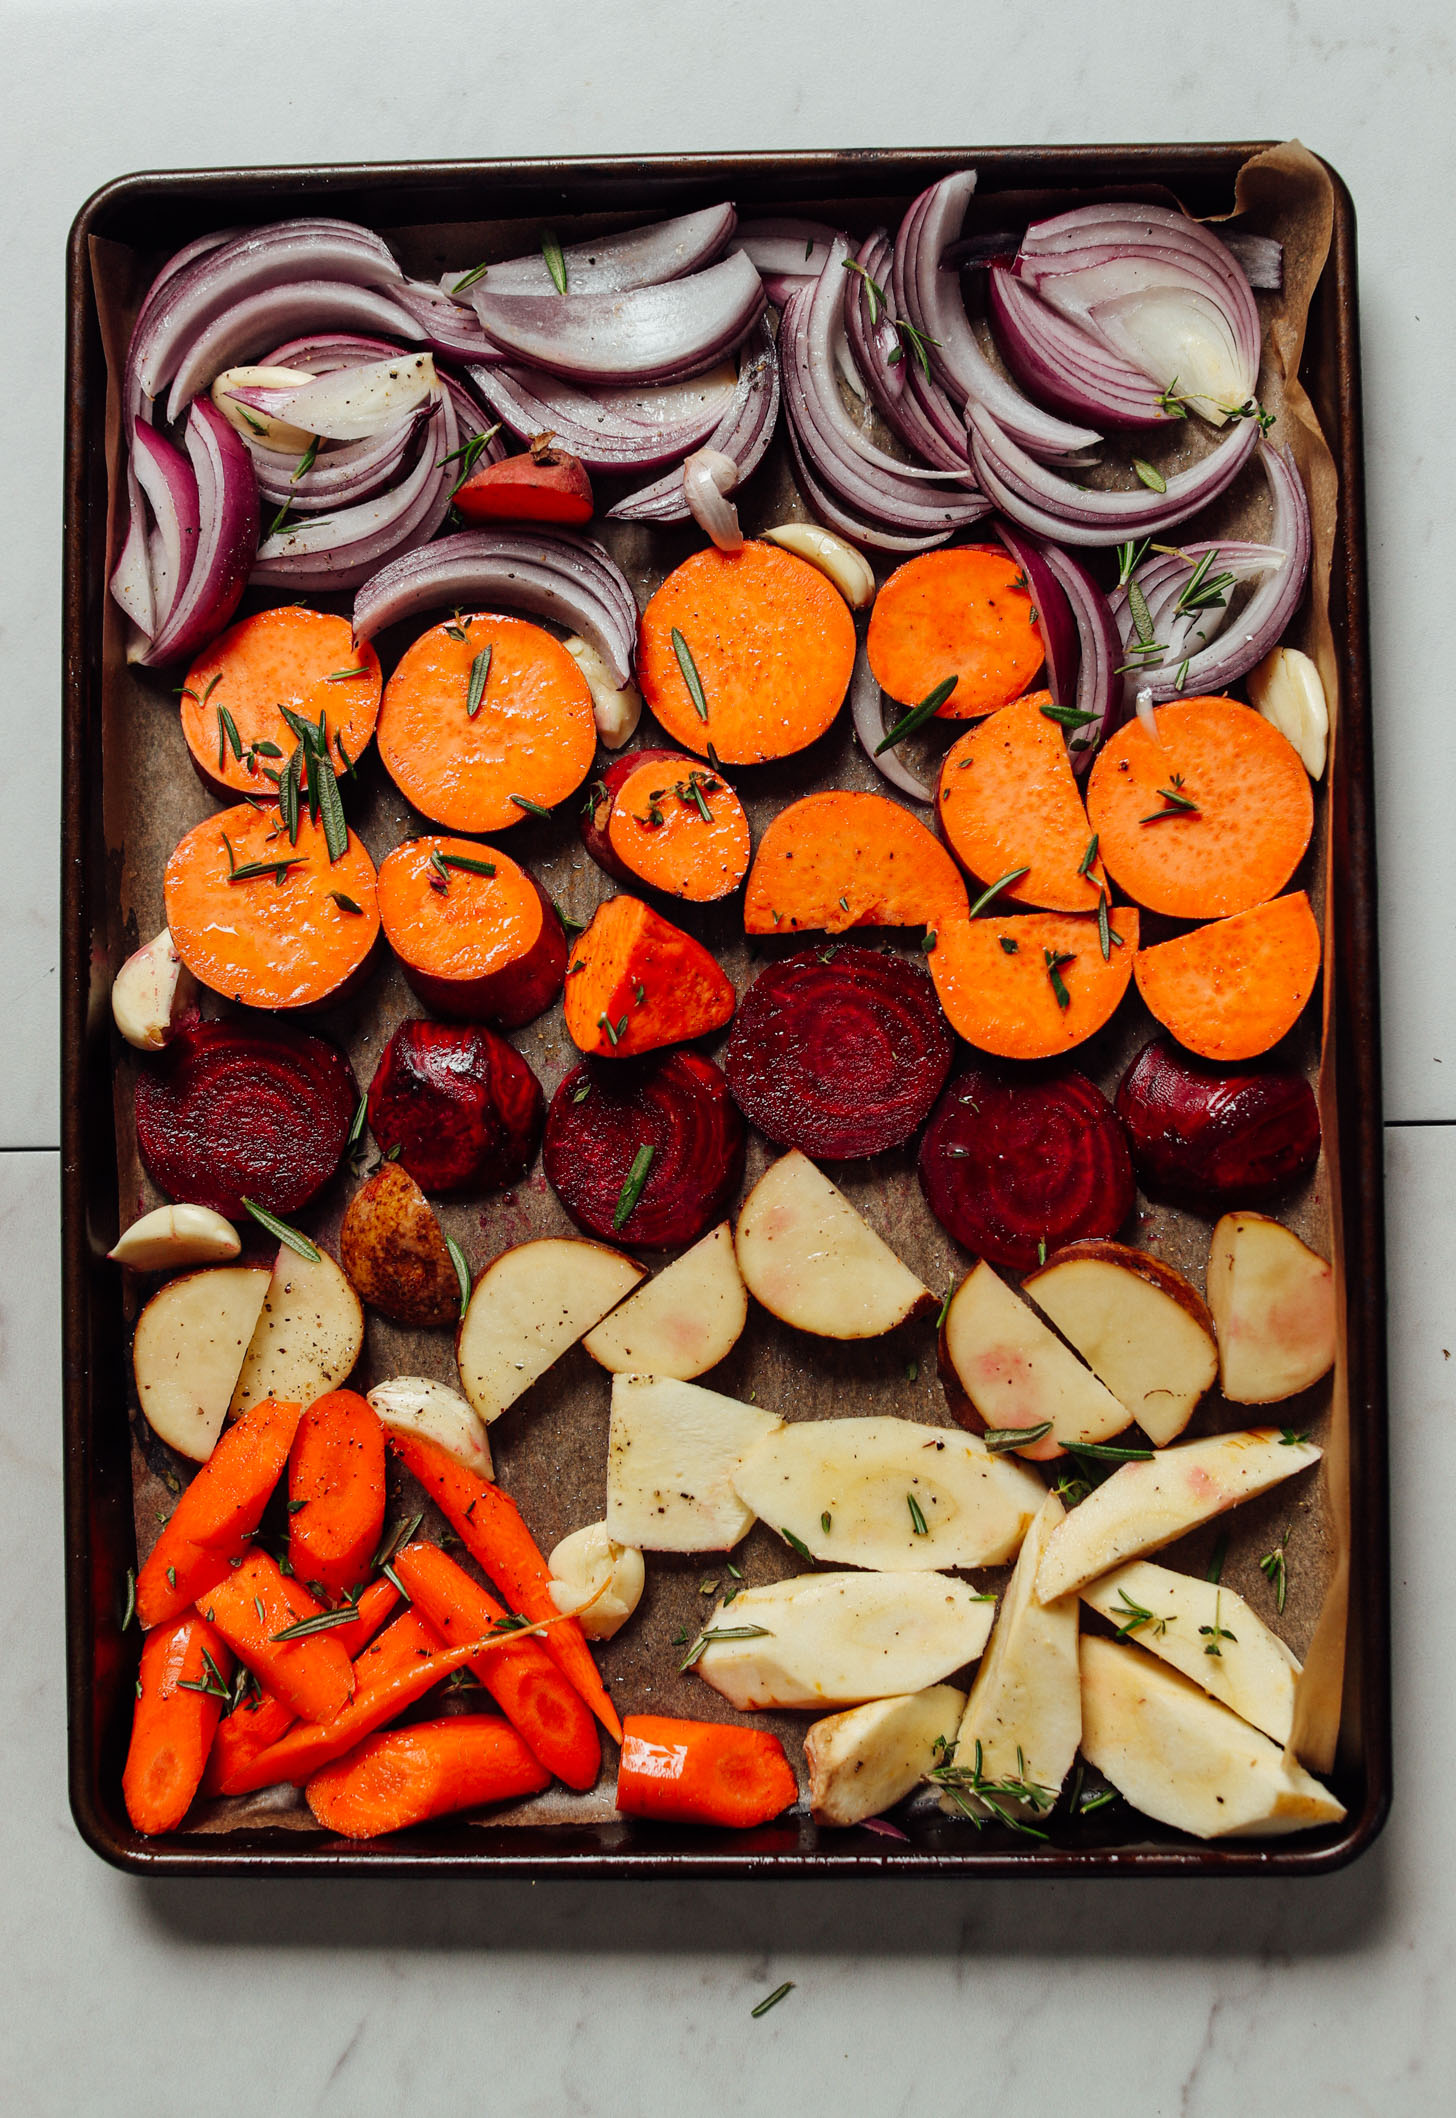 Parchment-lined baking sheet filled with sliced vegetables and herbs for roasting